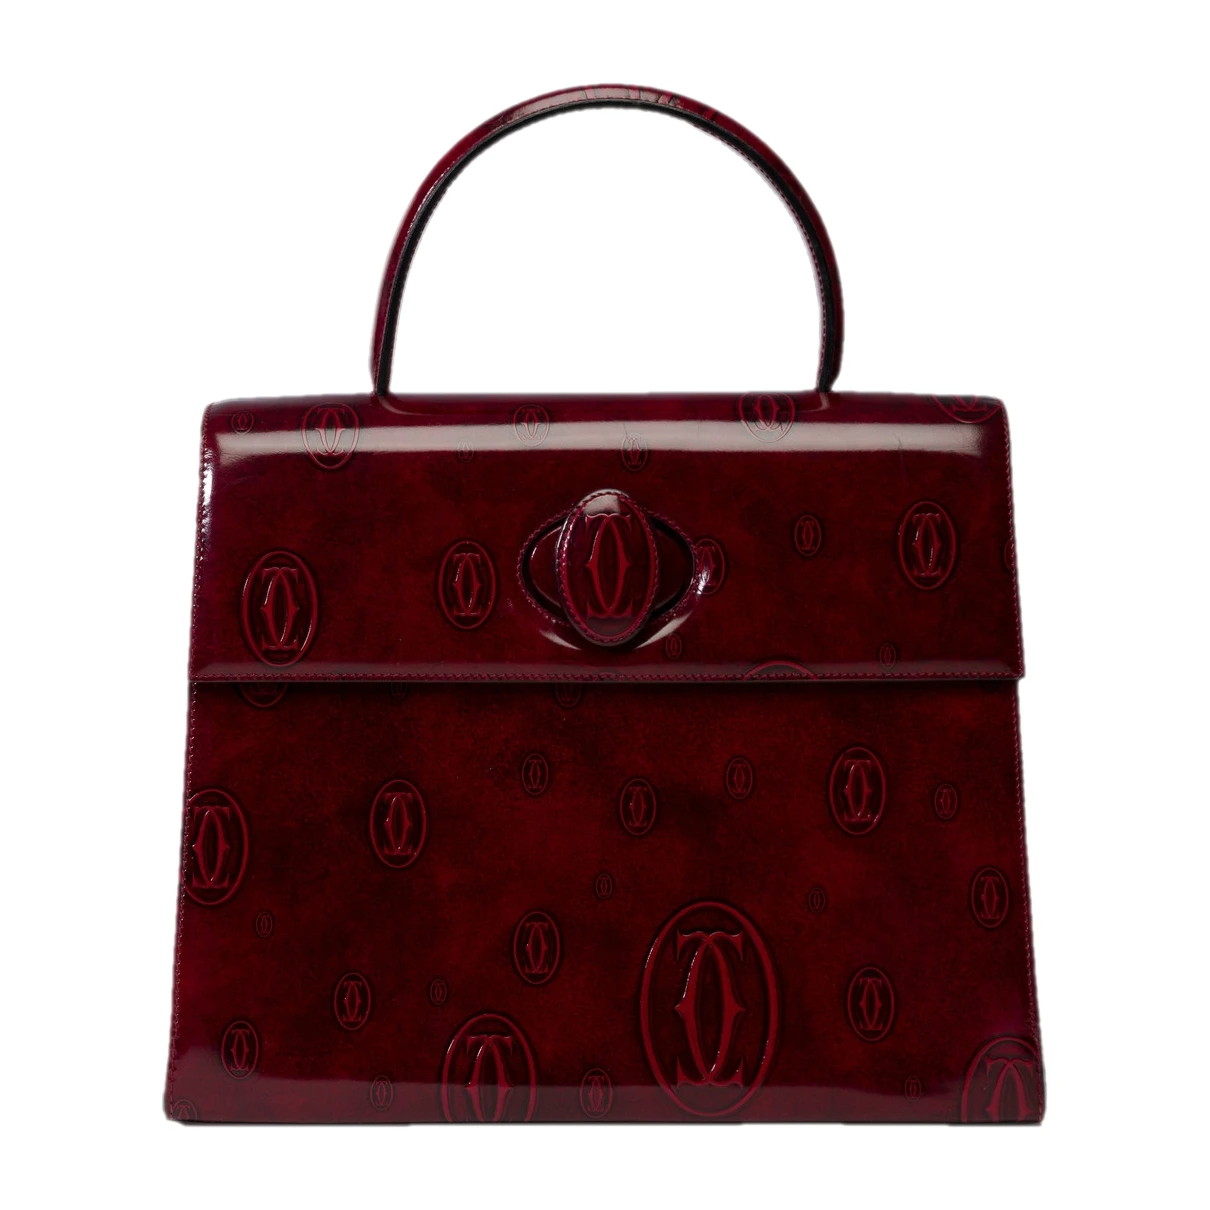 Pre-owned Cartier Patent Leather Handbag In Burgundy